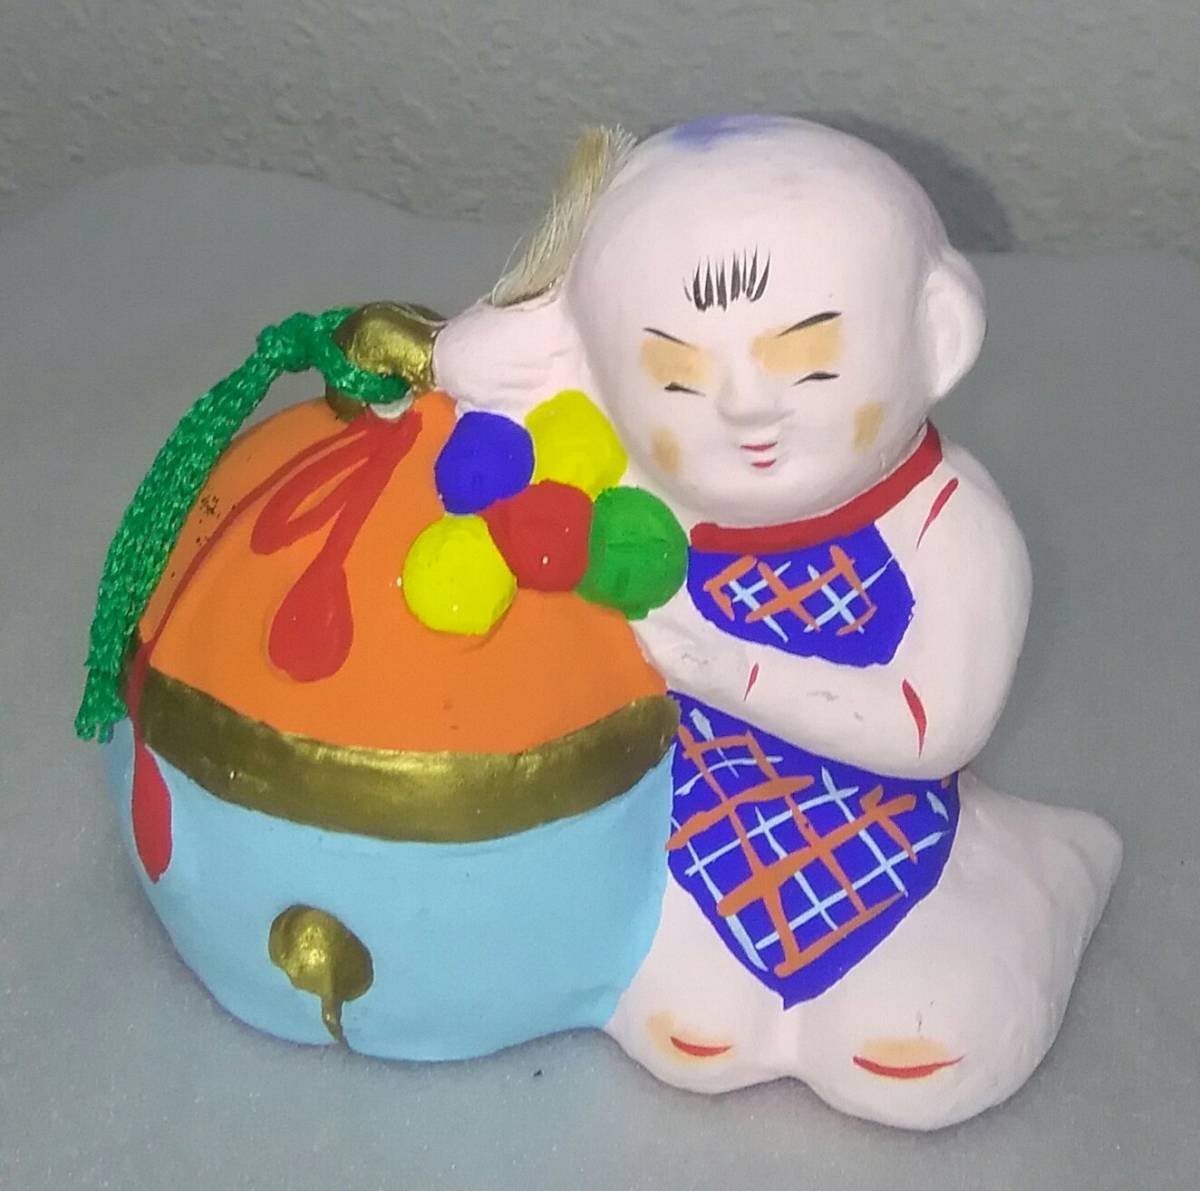 * earth bell bell ... it takes .. child kabuki earth production thing god company temple ornament decoration thing objet d'art other 